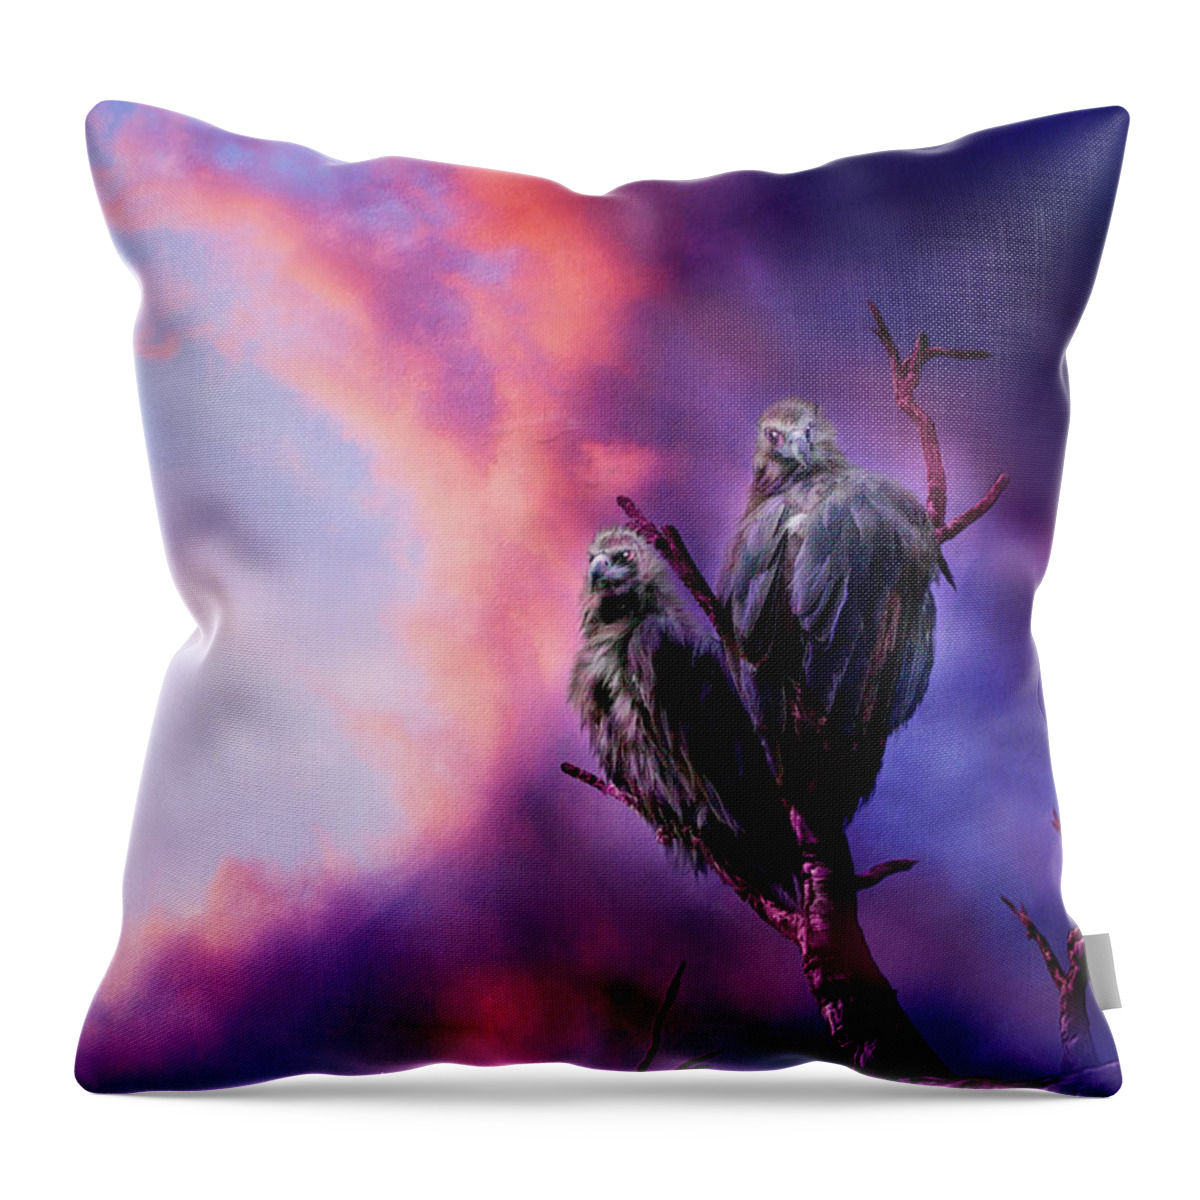 Vulture Throw Pillow featuring the mixed media Strange Togetherness by Carol Cavalaris